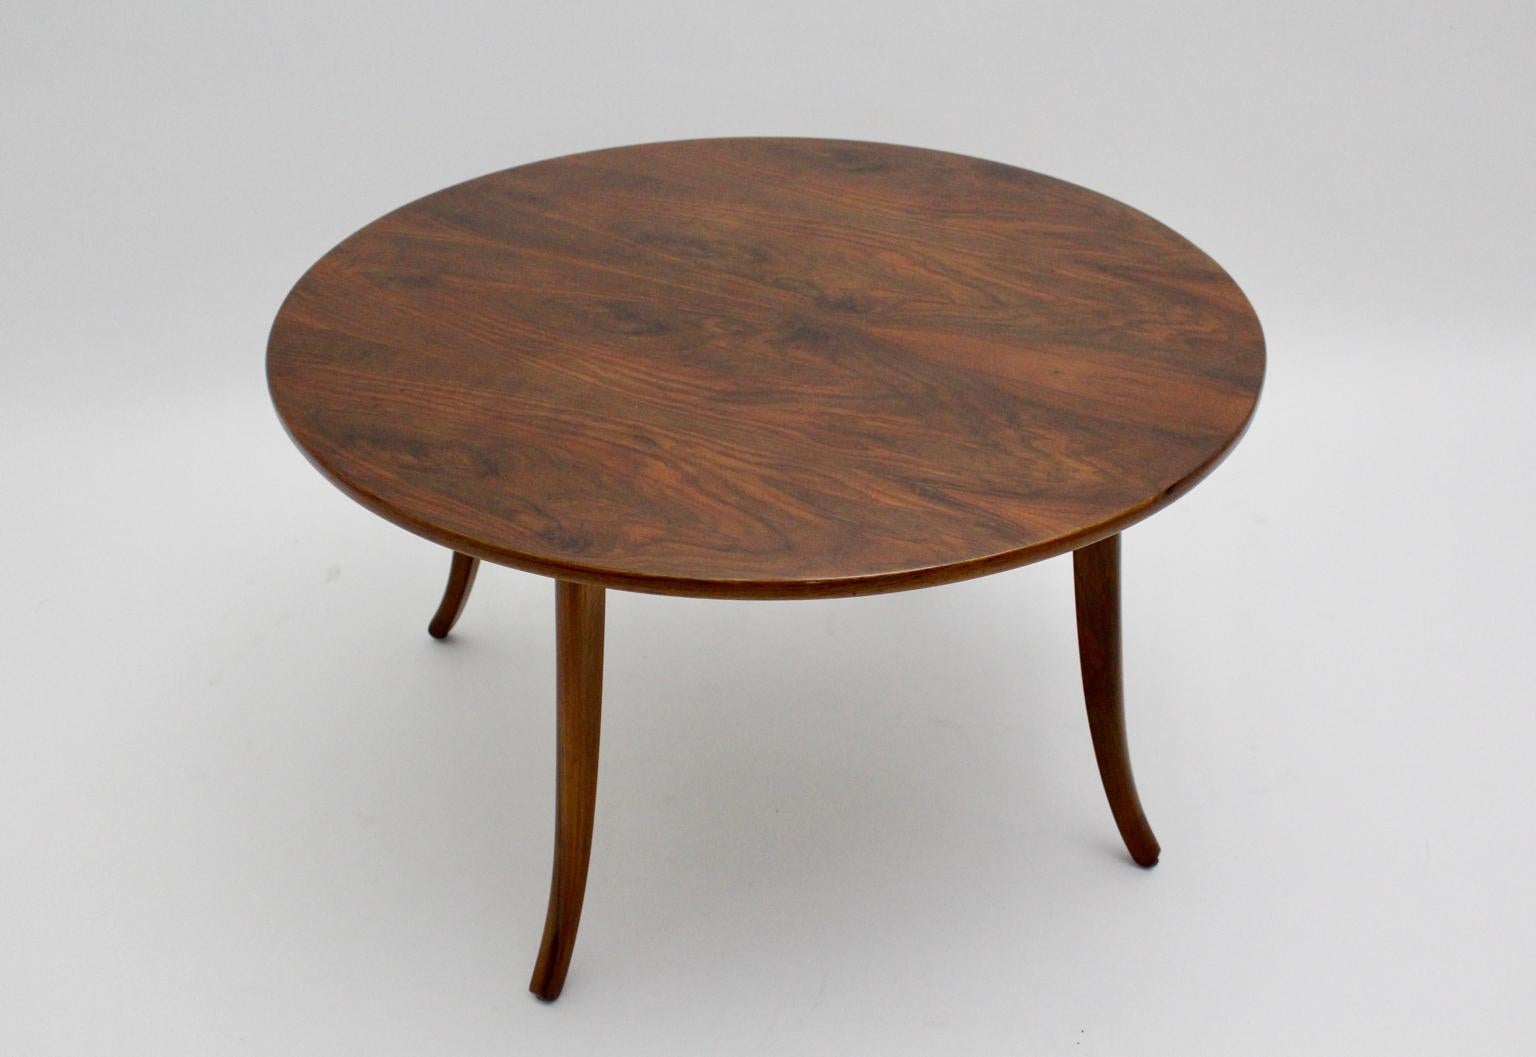 Art Deco trilegged round walnut coffee table by Felix Augenfeld and executed by Karl Schreitel, Wien circa 1927.
This coffee table or sofa table was made of solid walnut and the top is veneered with a beautiful walnut root wood.
Furthermore the